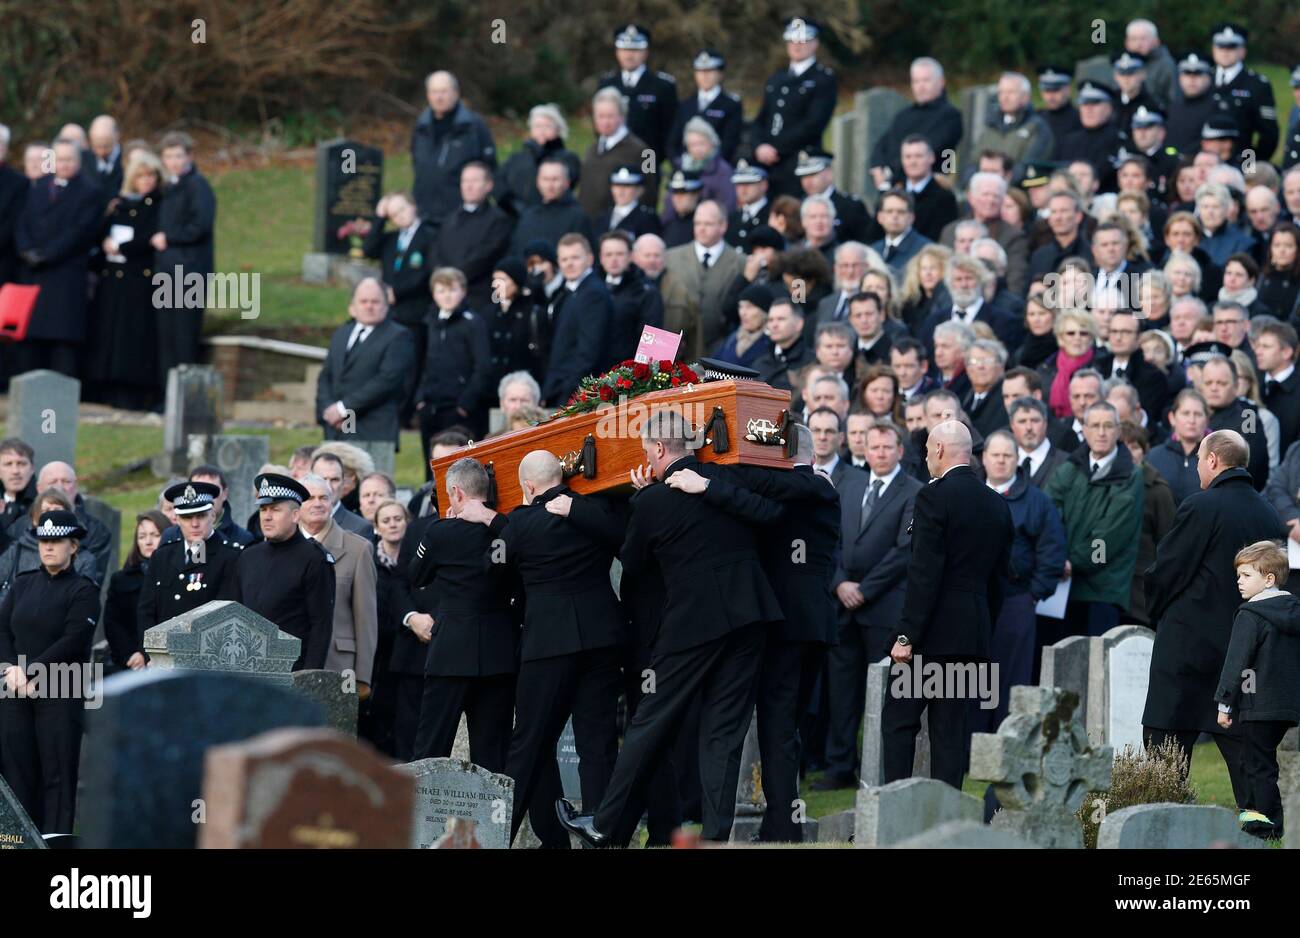 Page 9 Scotland Funeral High Resolution Stock Photography And Images Alamy